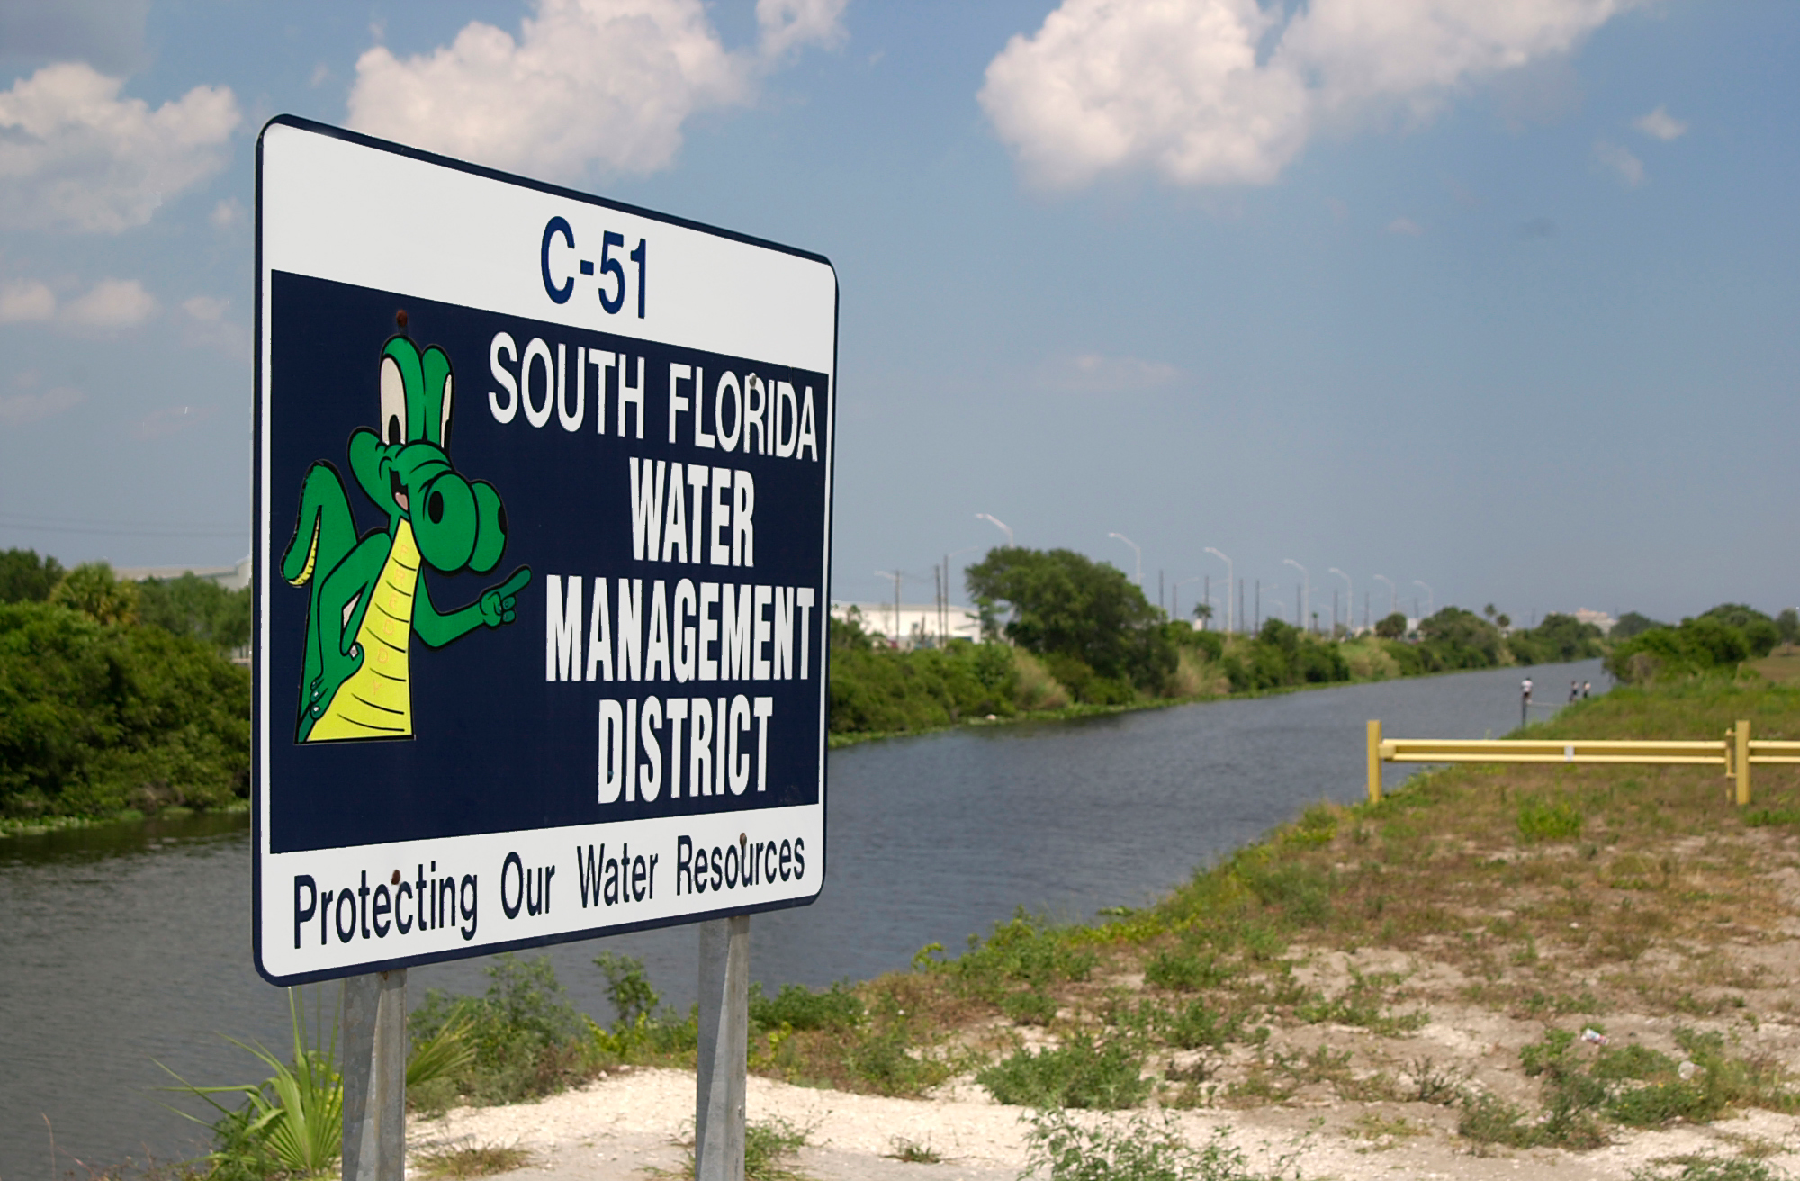 Government image of a South Florida Water Management District sign